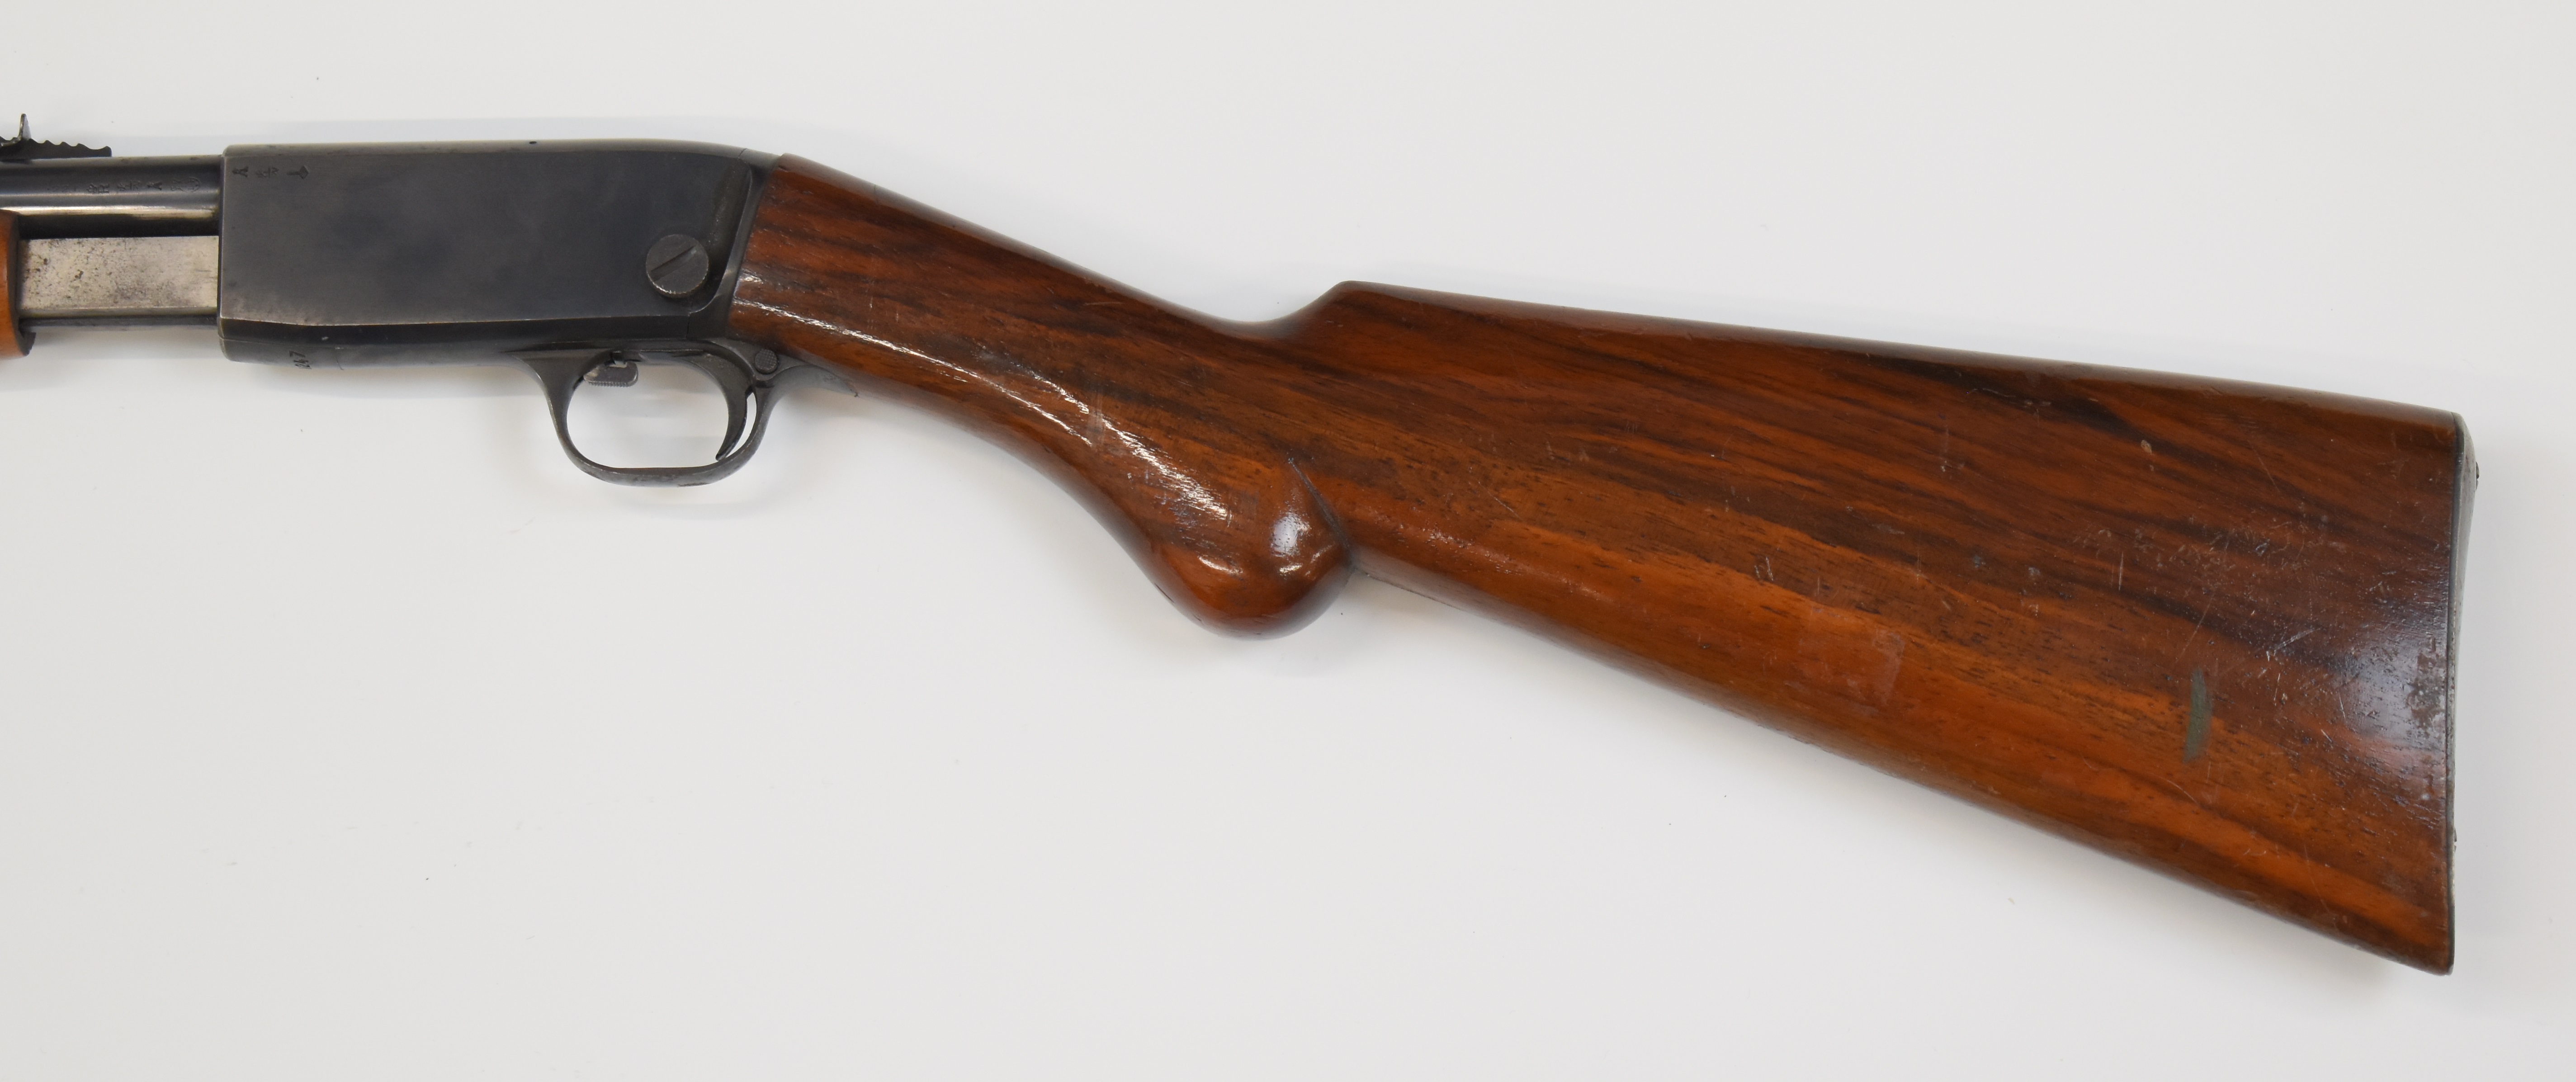 Browning .22 pump-action rifle with semi-pistol grip, adjustable sights and 21.5 inch barrel, - Image 7 of 9